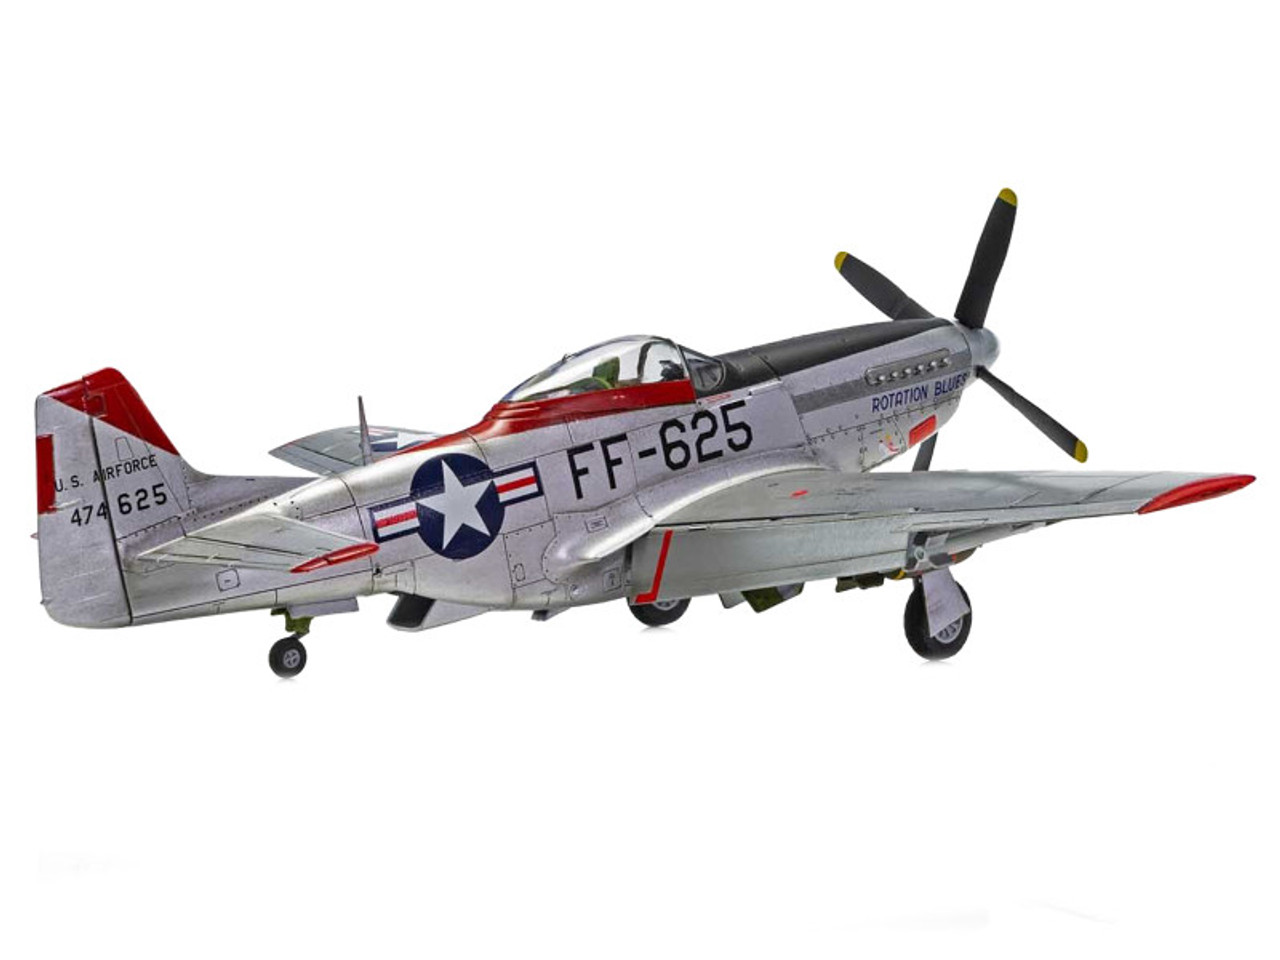 Skill 2 Model Kit North American F-51D Mustang Fighter Aircraft with 3 Scheme Options 1/48 Plastic Model Kit by Airfix